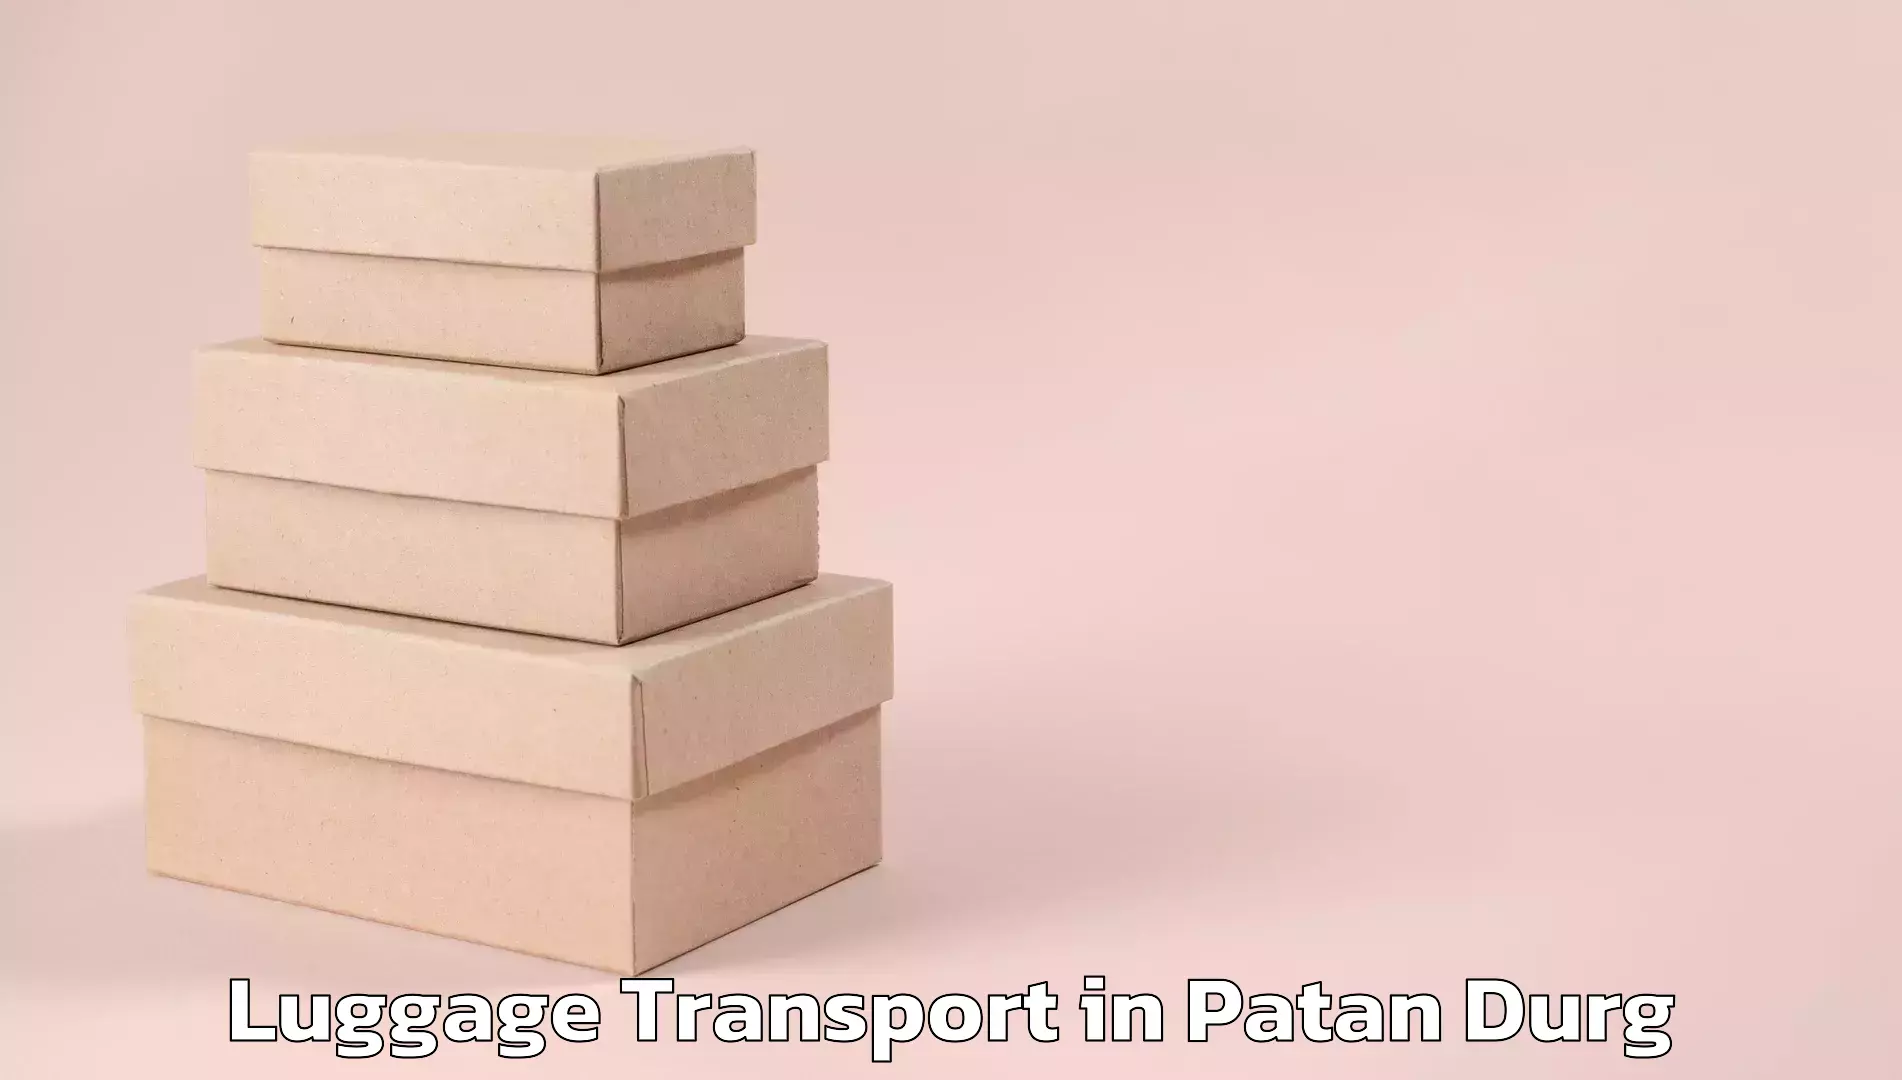 Luggage transport service in Patan Durg